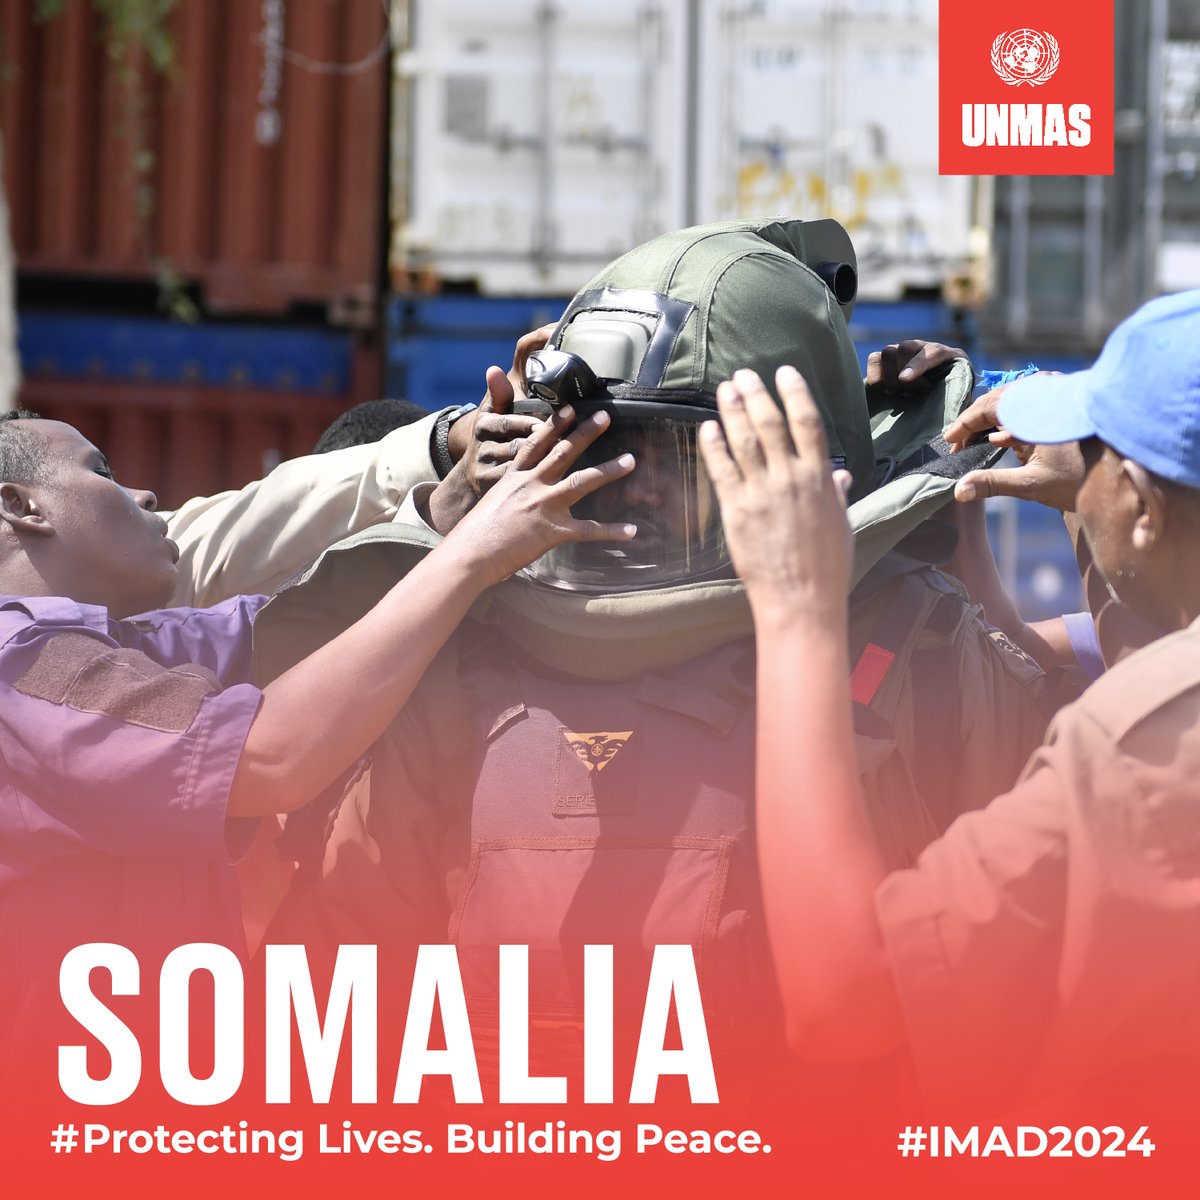 Every hour, mines & explosives continue to cause death & injury globally including in #Somalia, with children often the victims.

As we mark #IMAD2024, @UNMAS is advocating for greater awareness of needs & rights of people with disabilities in conflict settings. #MineAction